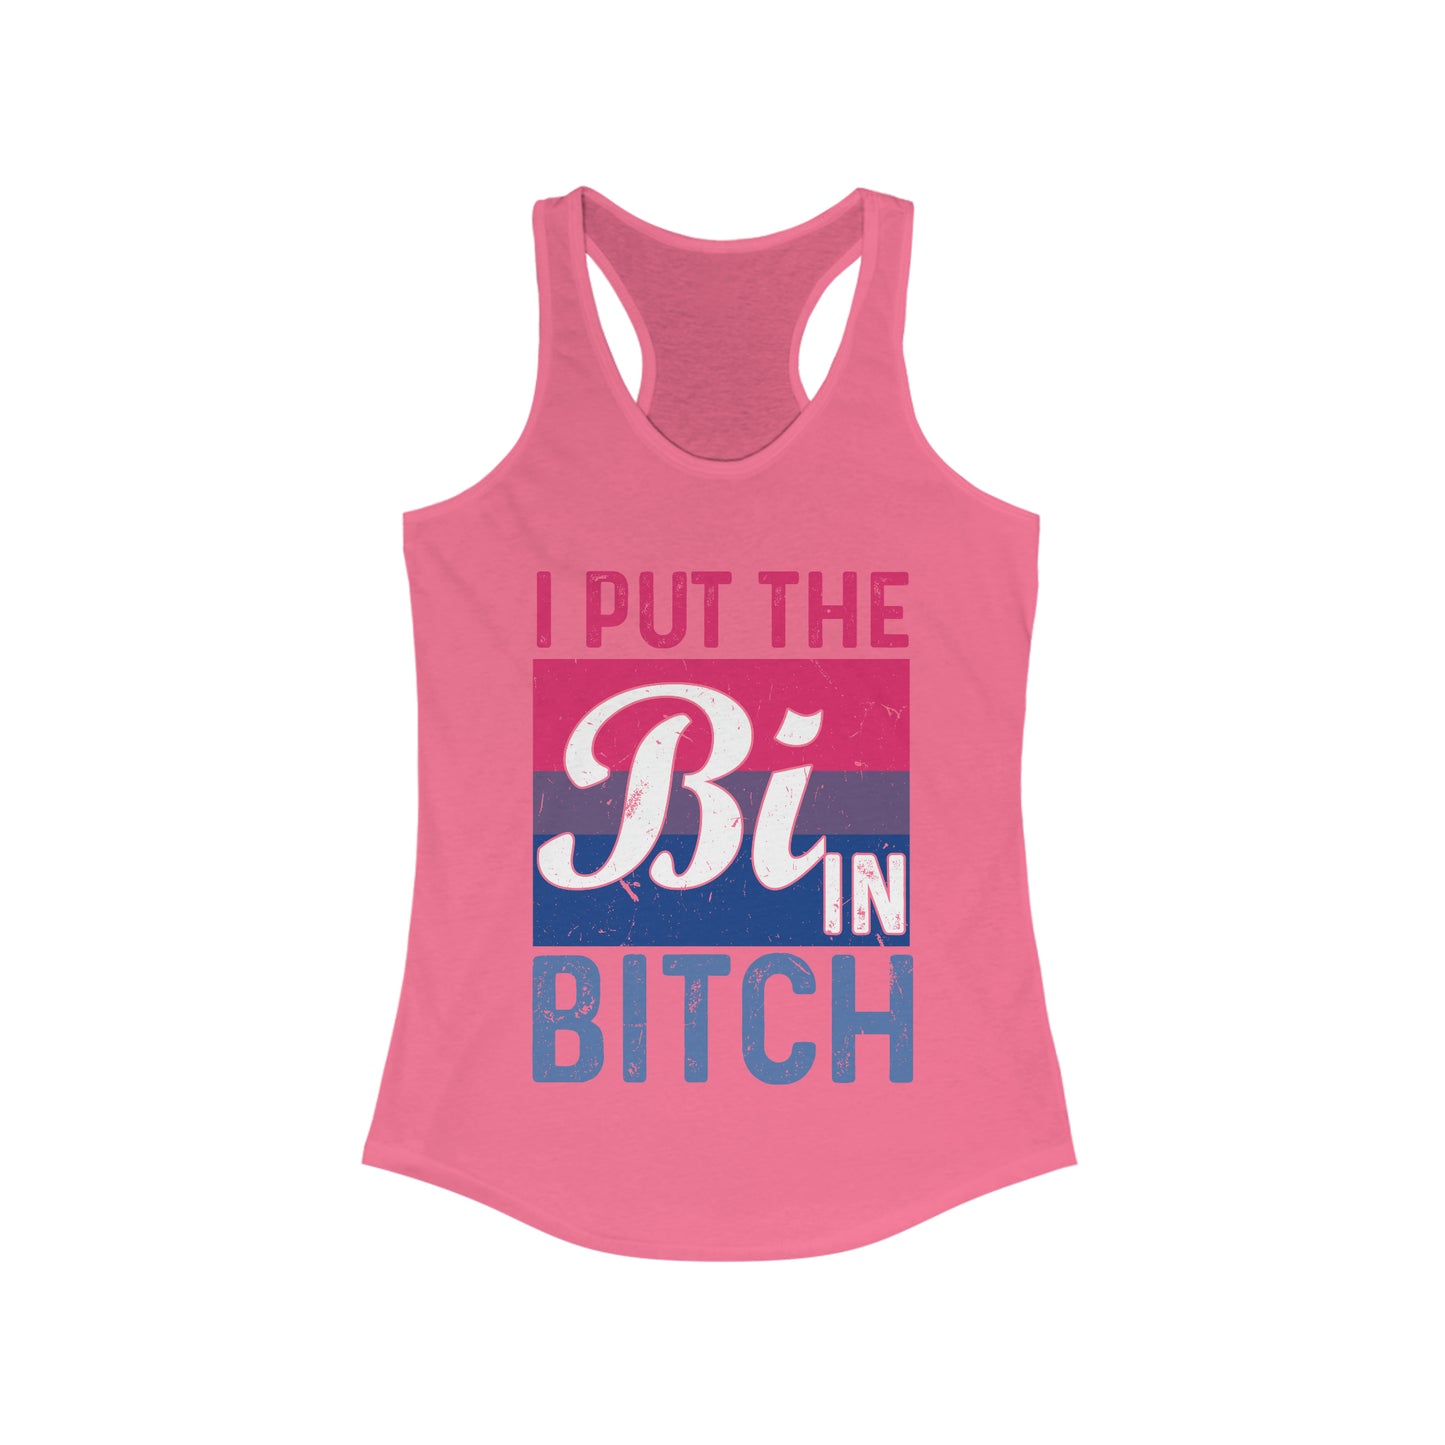 I Put The Bi In Bitch Tank for fitness gym & every day wear